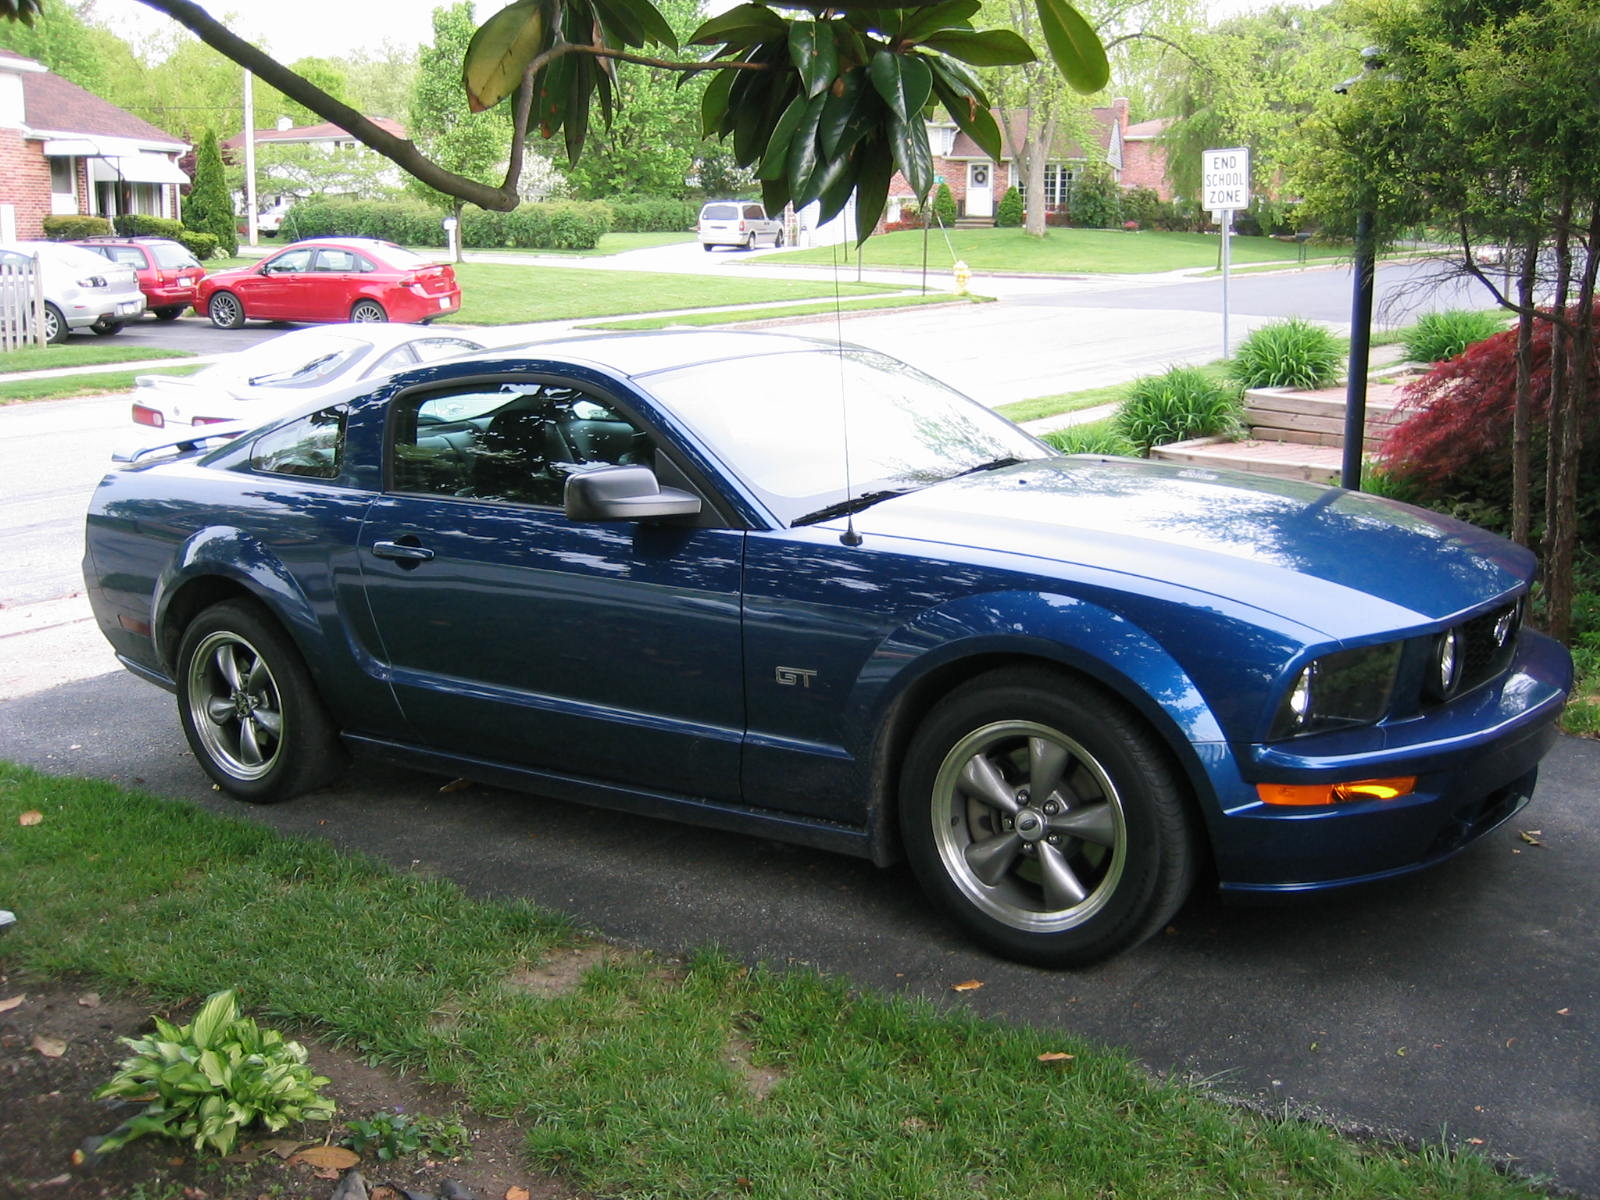 2006 Ford mustang gt 0 to 60 #1